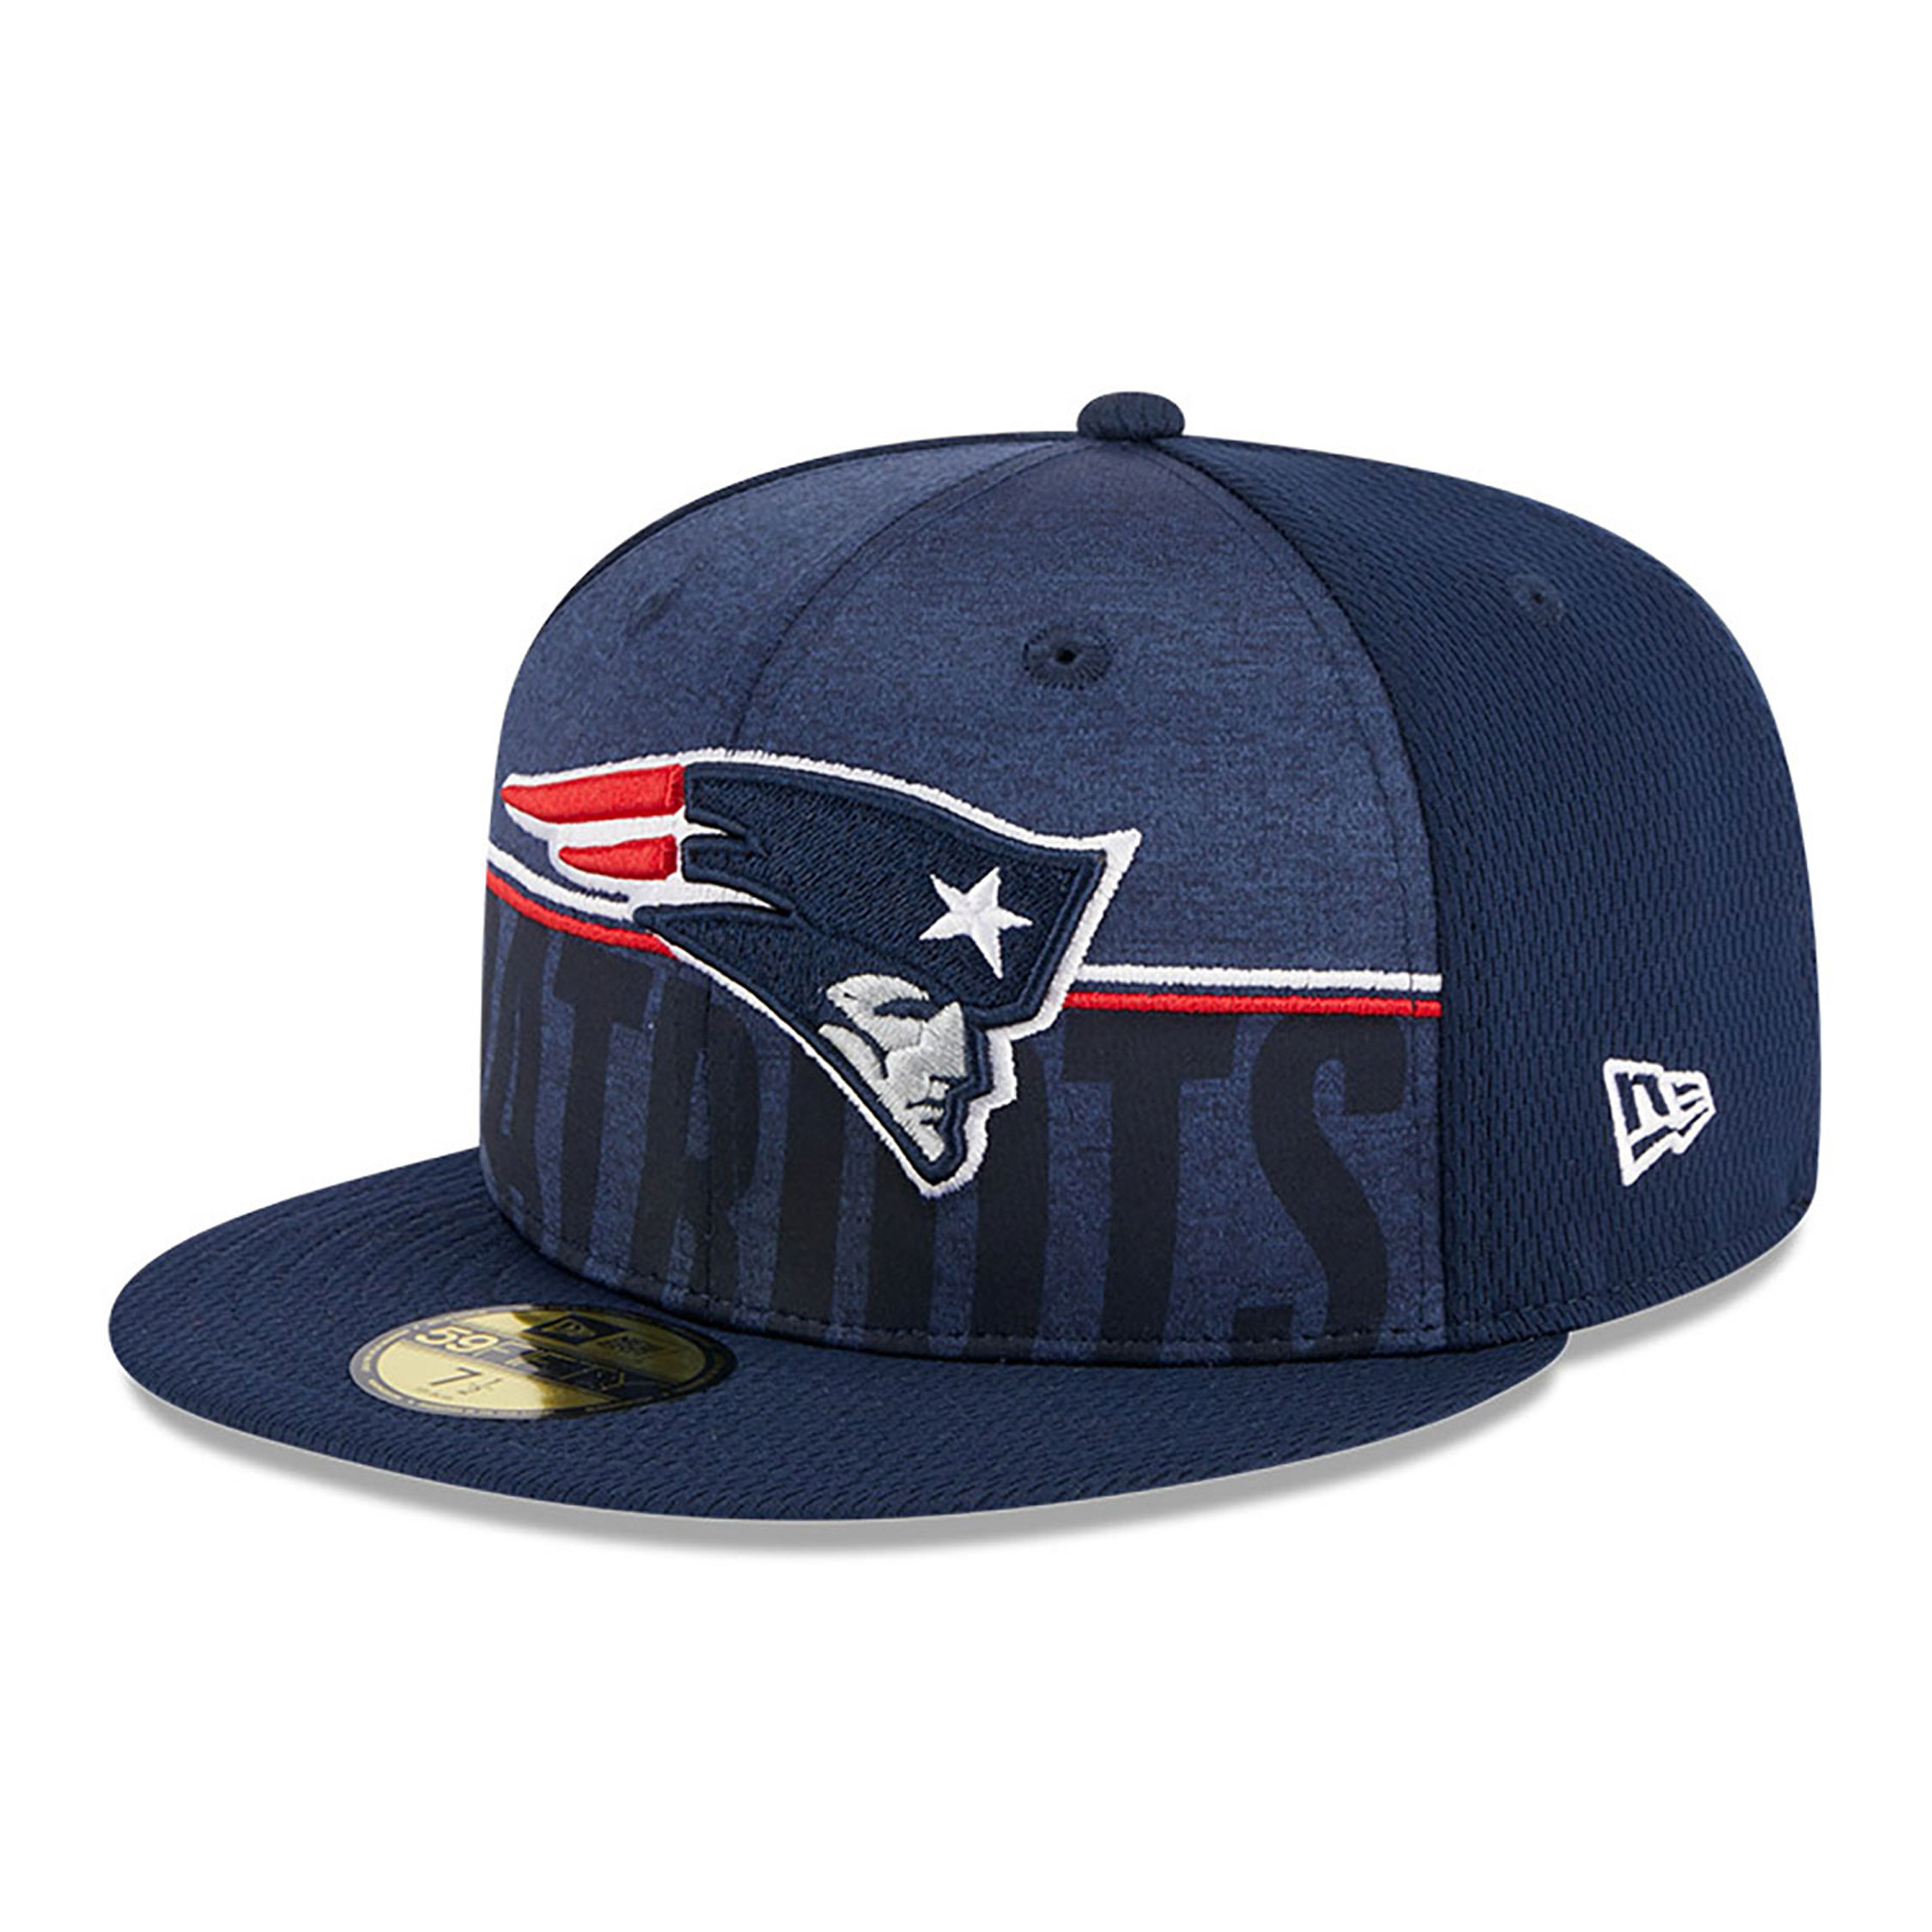 New England Patriots NFL Training Dark Blue 59FIFTY Fitted Cap